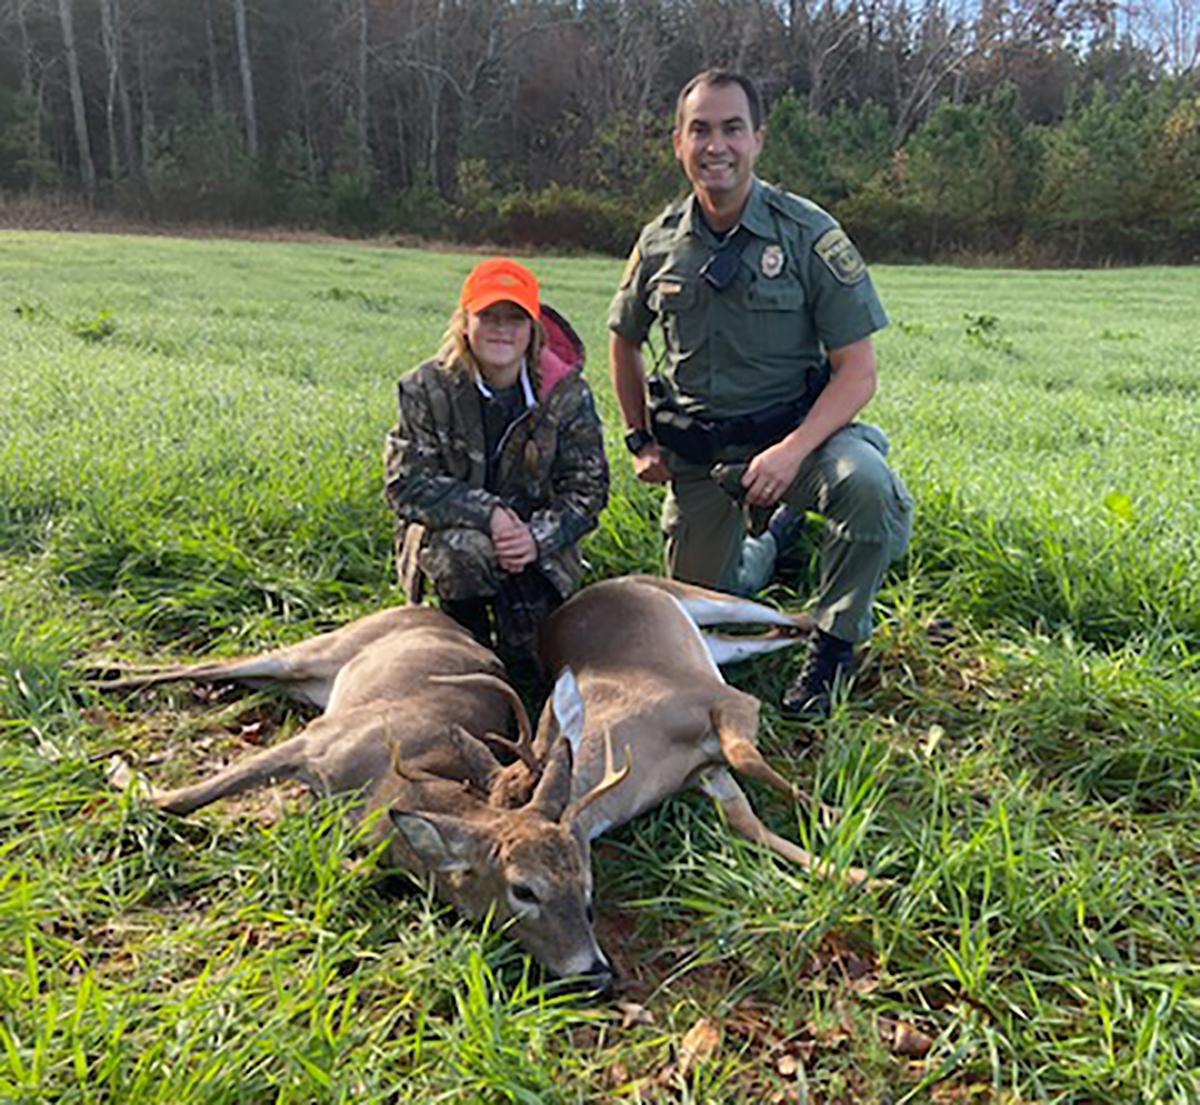 An image of CPO Cory Harbor and a young hunter posing in front of two dead deer